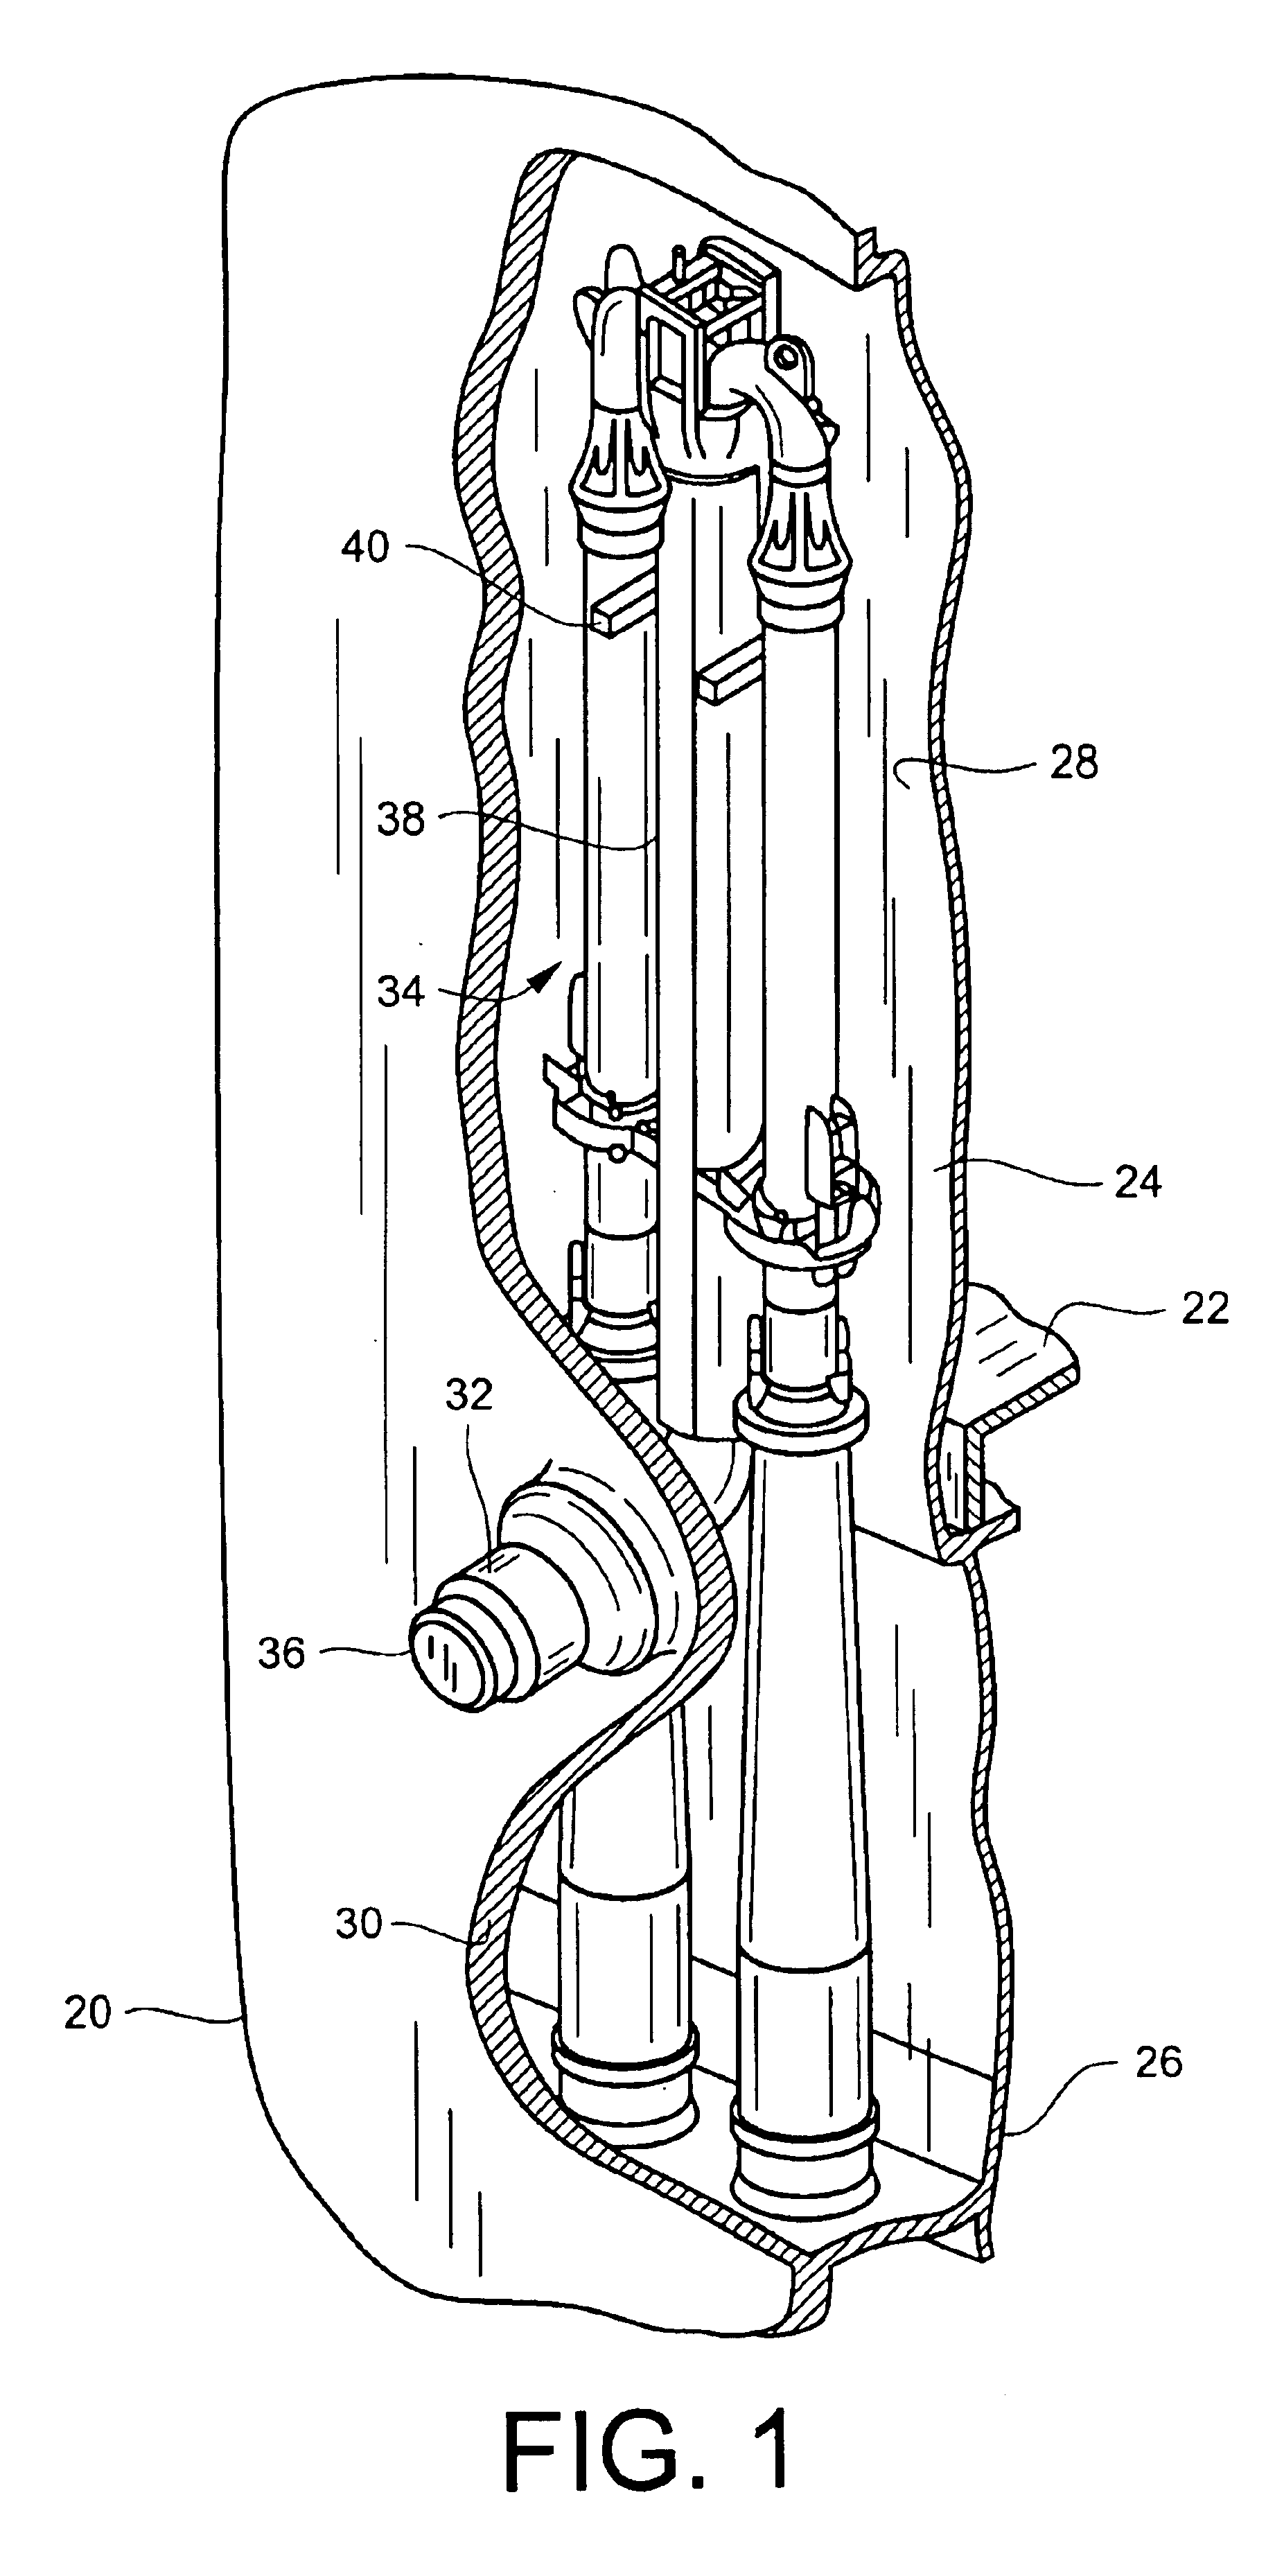 Method and apparatus for repairing a riser brace in nuclear reactor